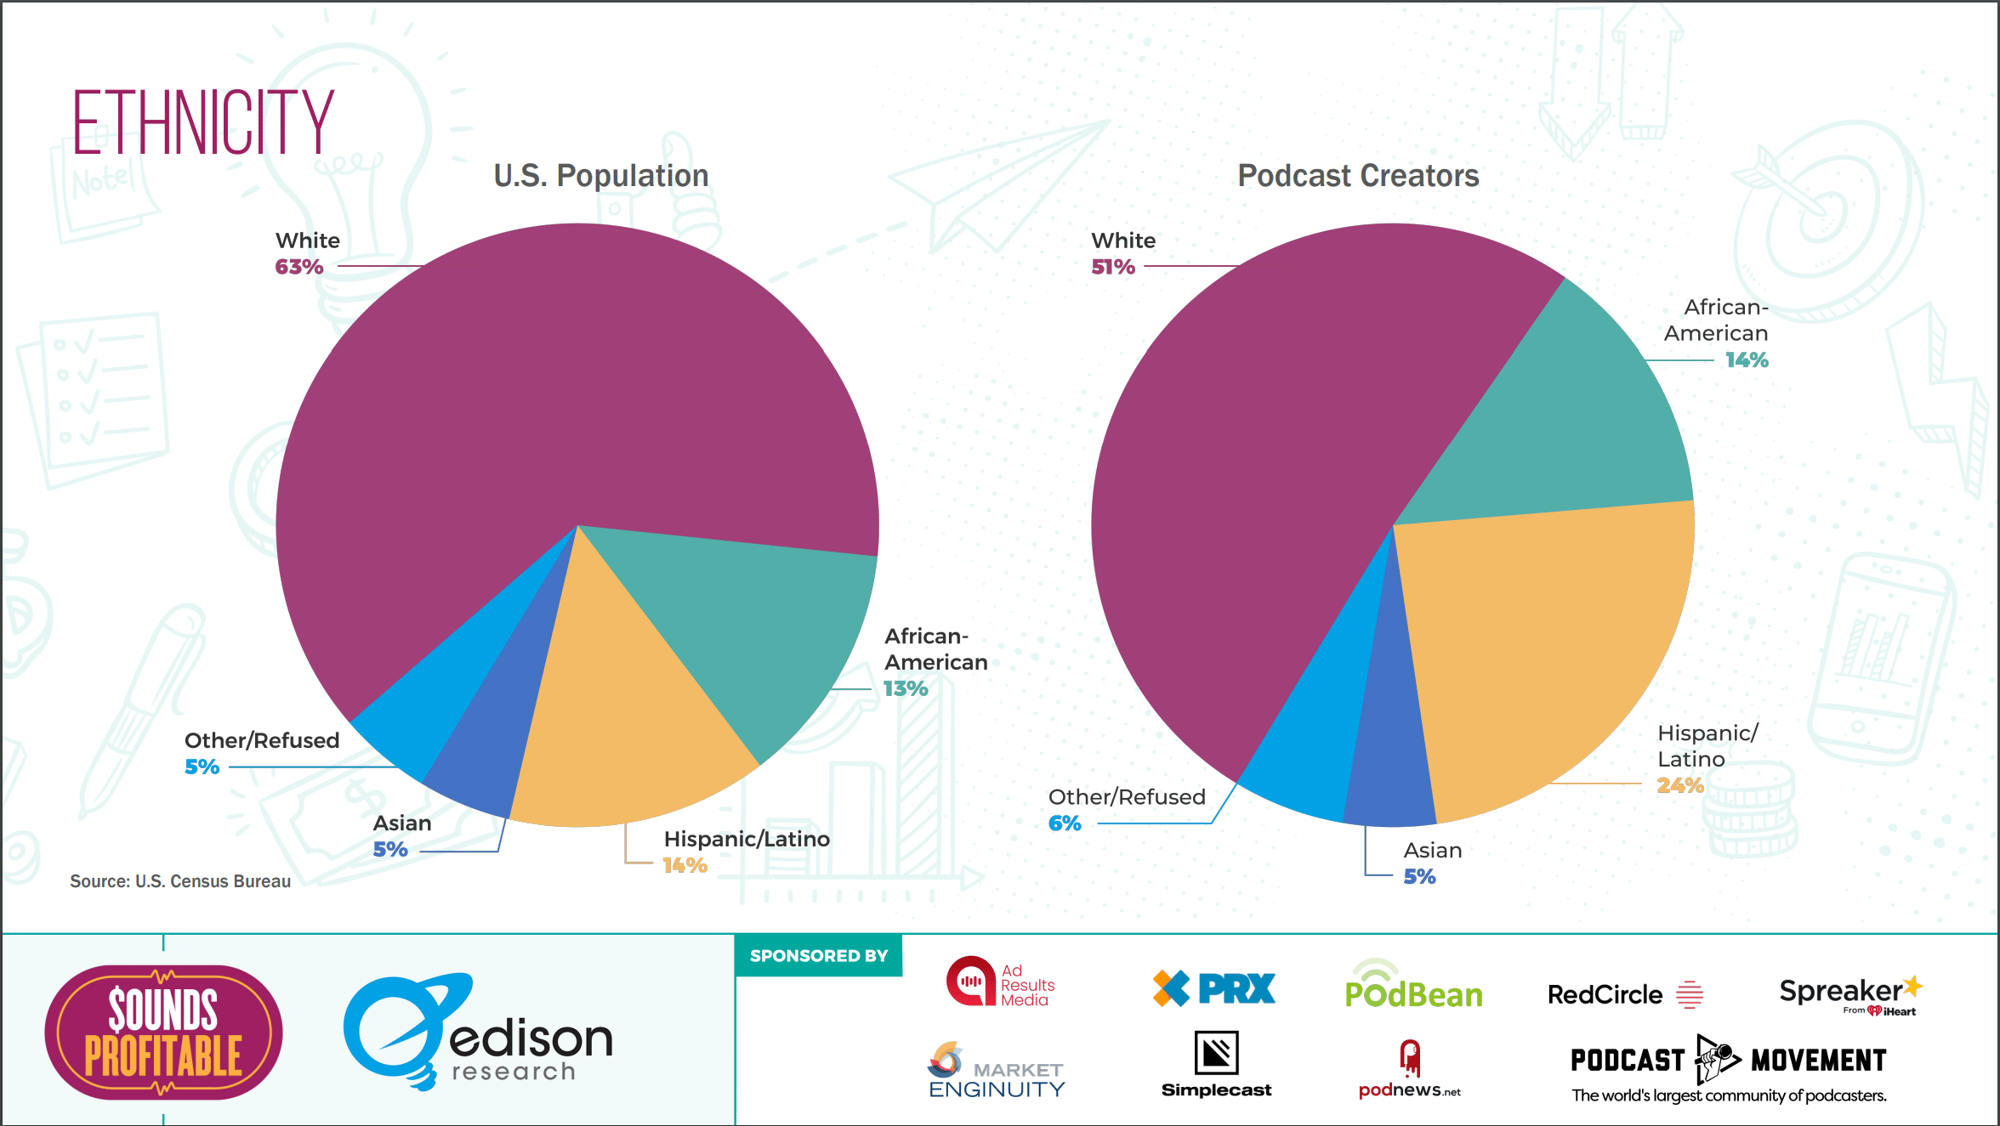 Ethnicity Comparison Pie Chart. Pie Chart 1 shows US population - white at 63%; African-American at 13%; Hispanic/Latino at 14%, Asian at 5%, and Other/Refused at 5%. Pie Chart 2 shows Podcast Creator population - white at 51%; African-American at 14%; Hispanic/Latino at 24%; Asian at 5%; and Other/Refused at 6%.